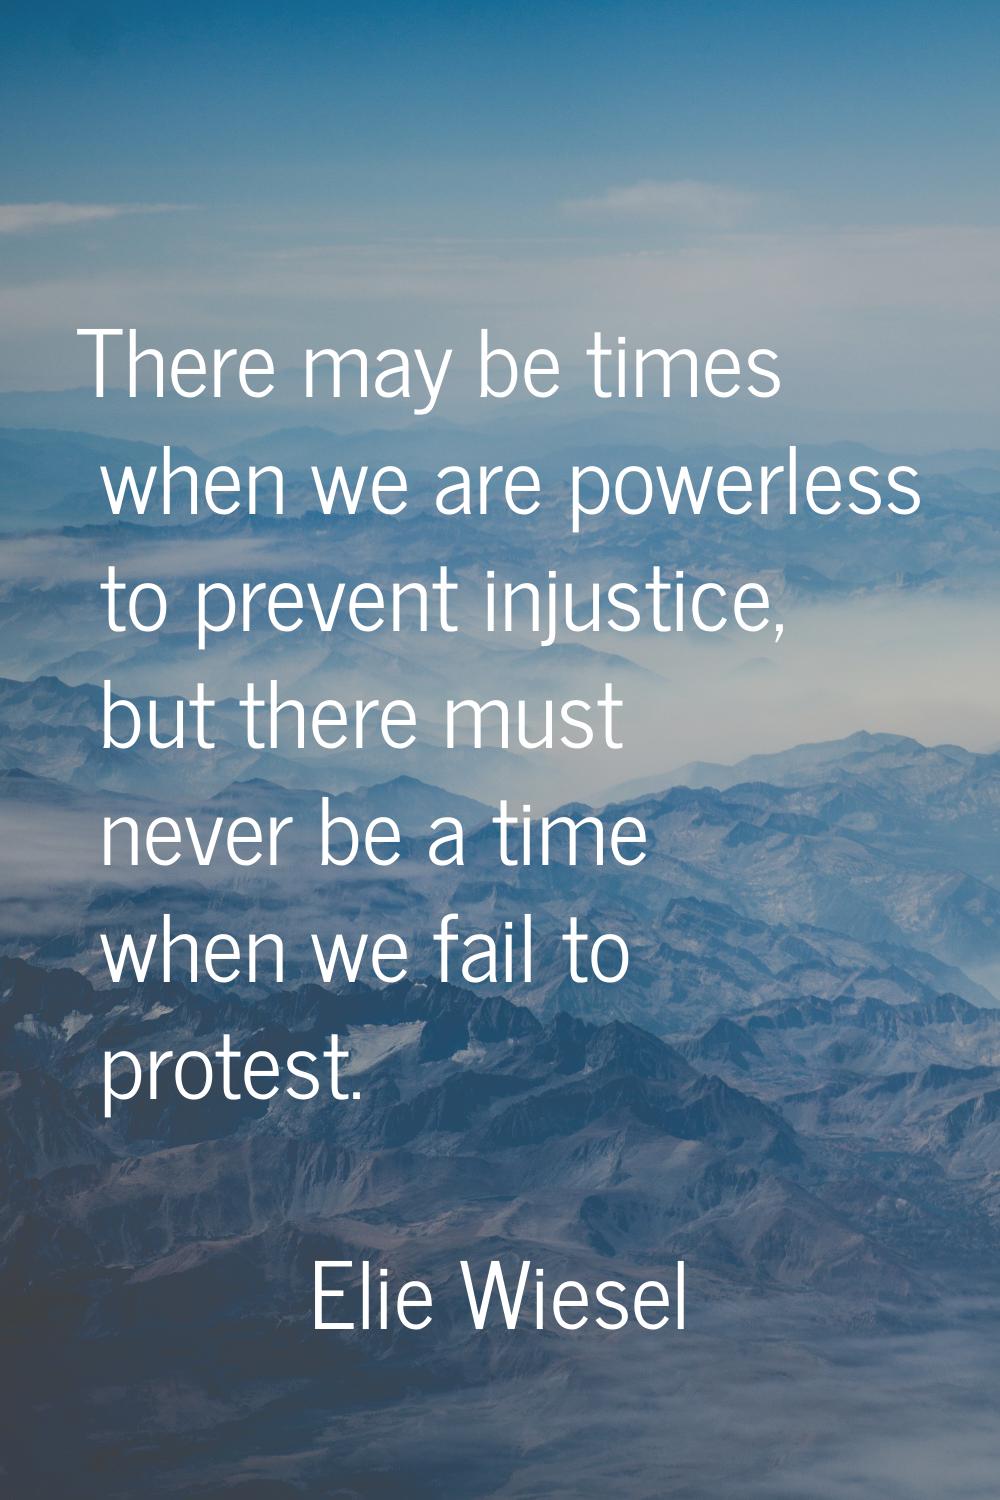 There may be times when we are powerless to prevent injustice, but there must never be a time when 